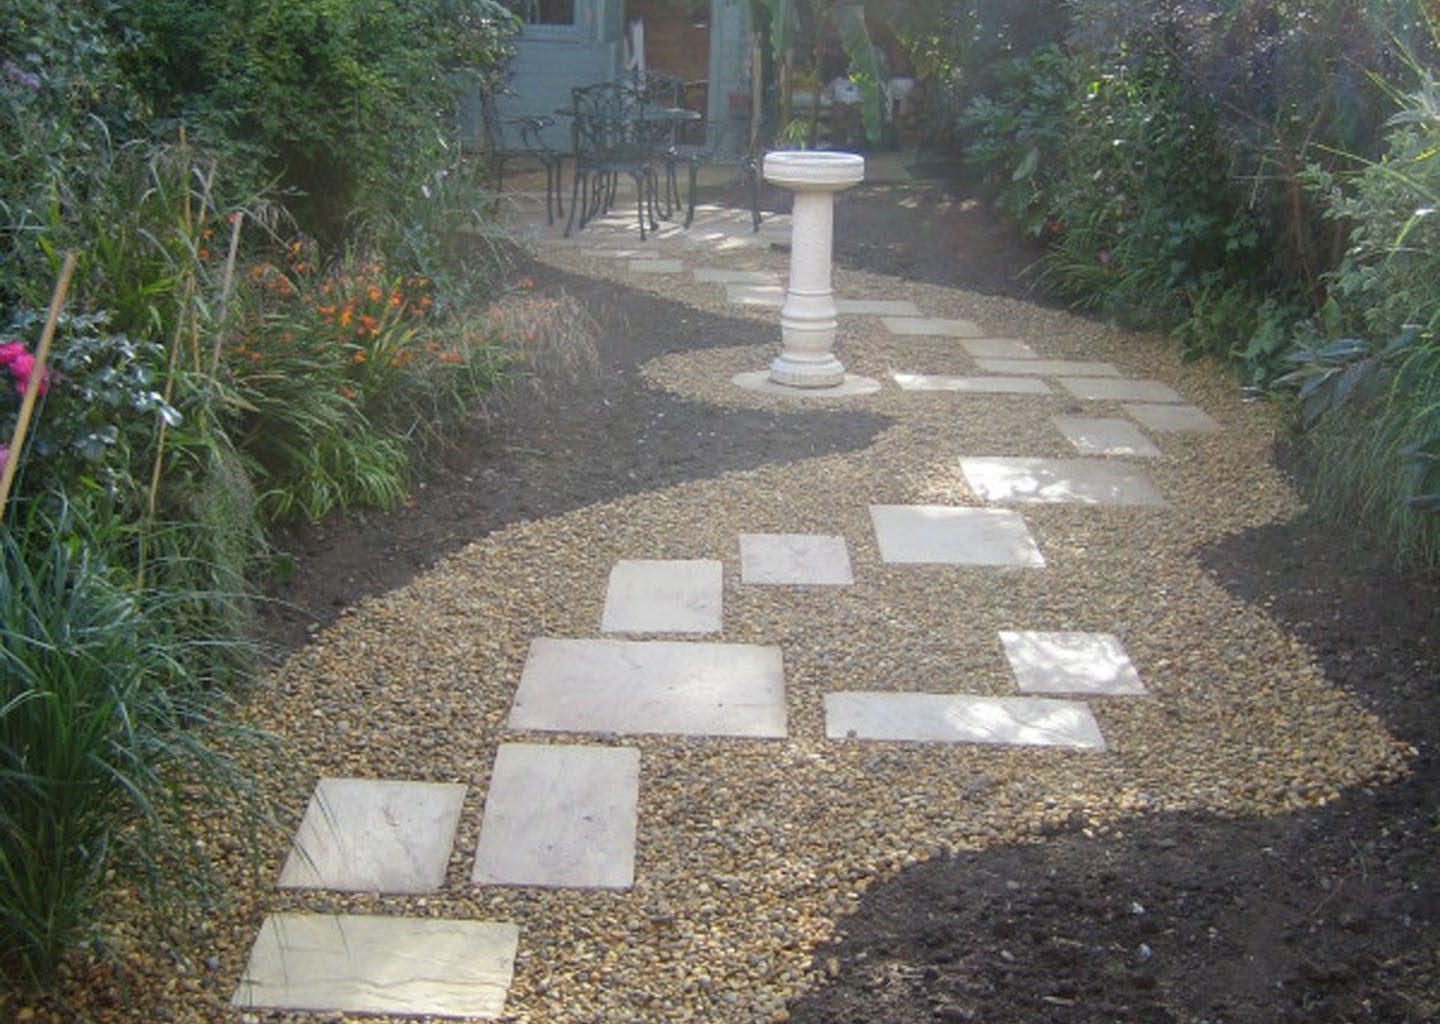 Rear garden with shingled pathway and paving stepping stones to access seating area and summer house